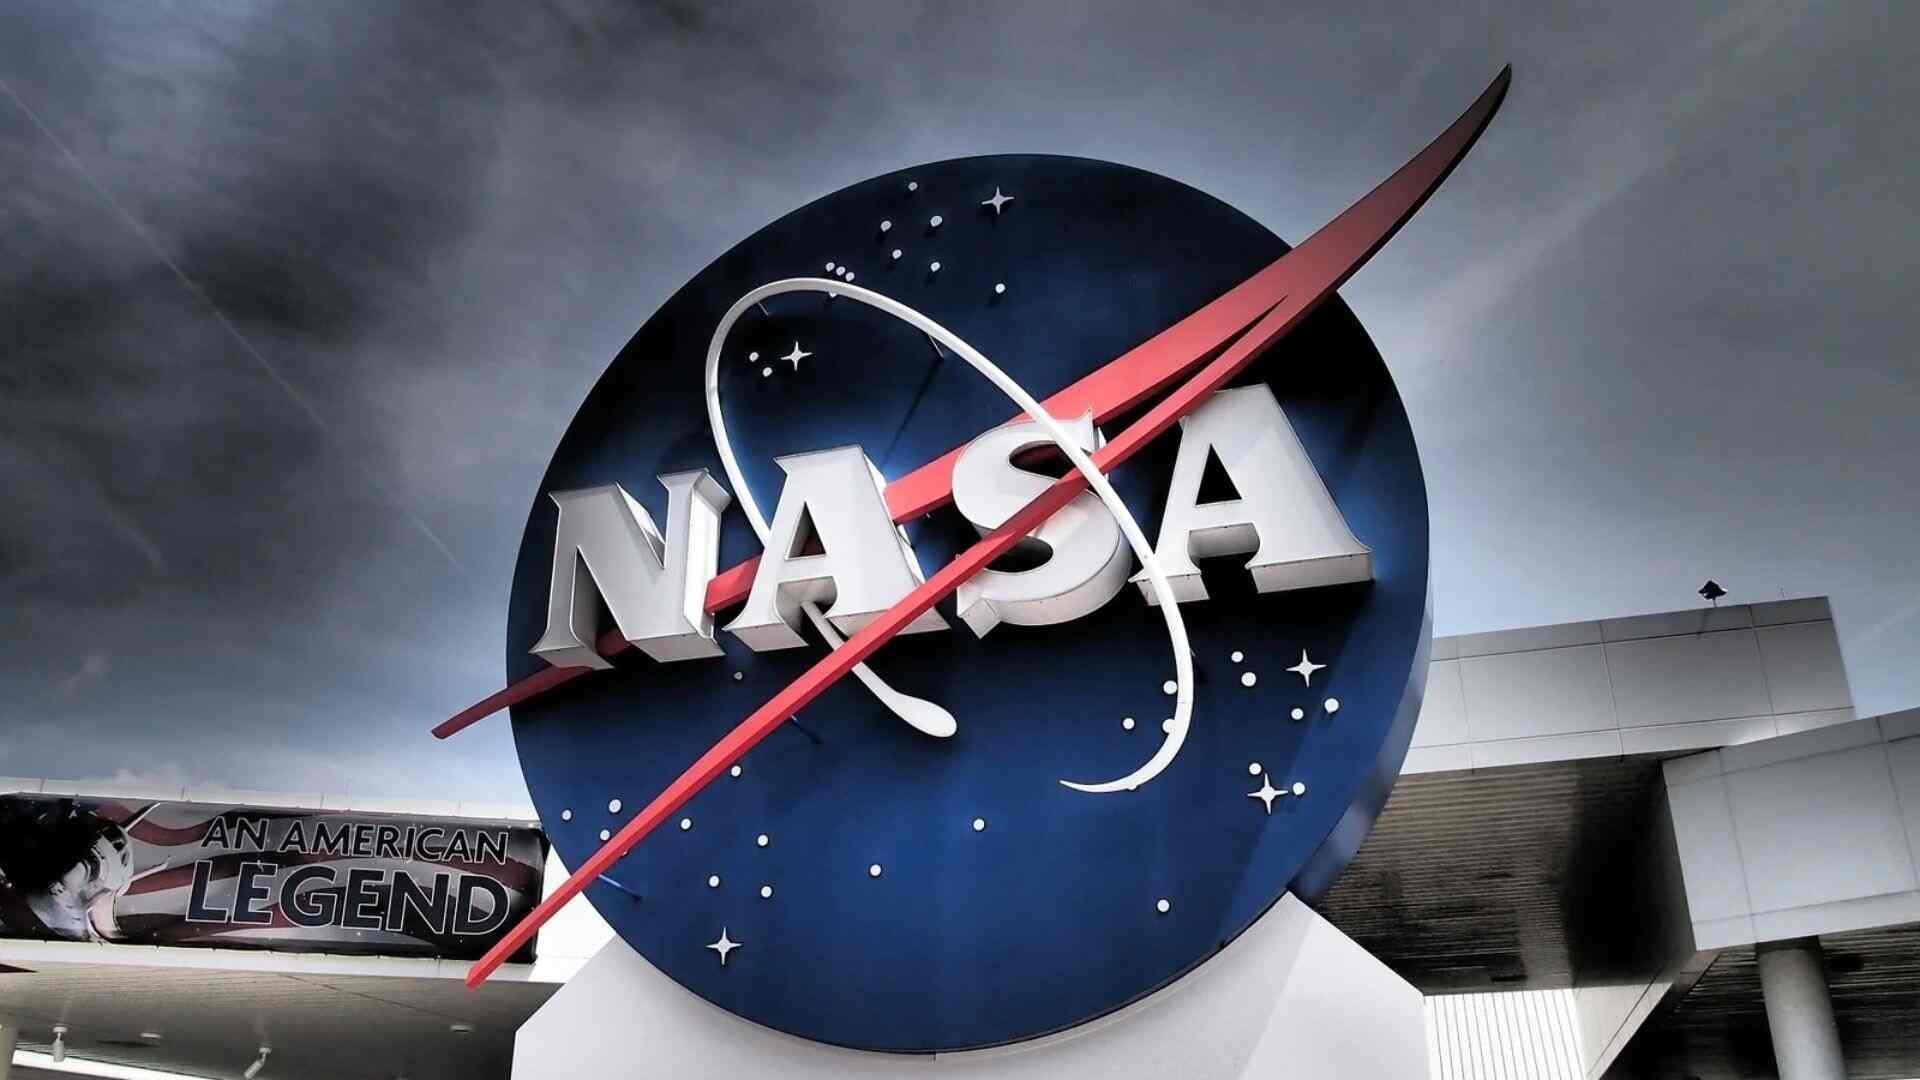 Joint ISS Mission: NASA Collaborates With India For Advanced Astronaut Training